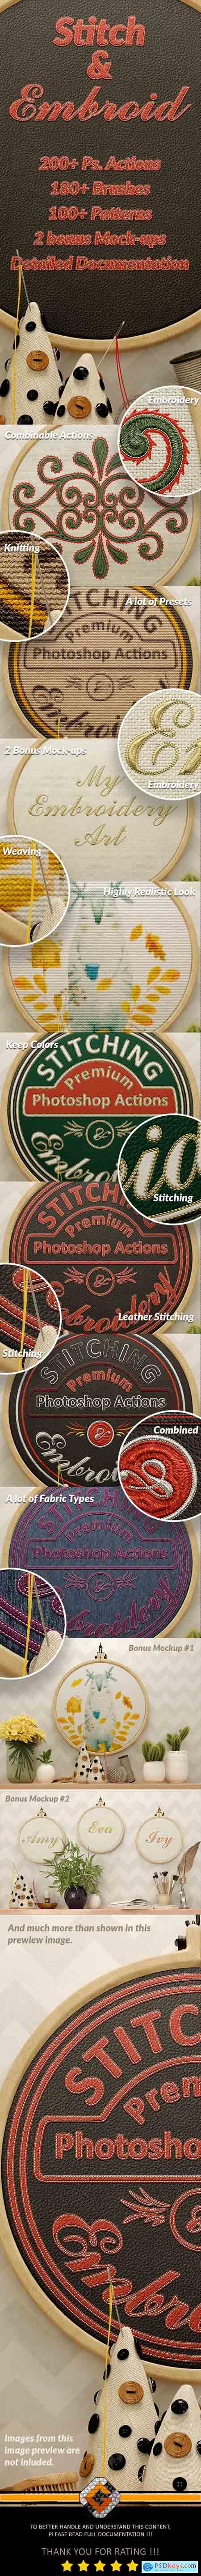 Graphicriver Stitch and Embroid - Titan Action Pack